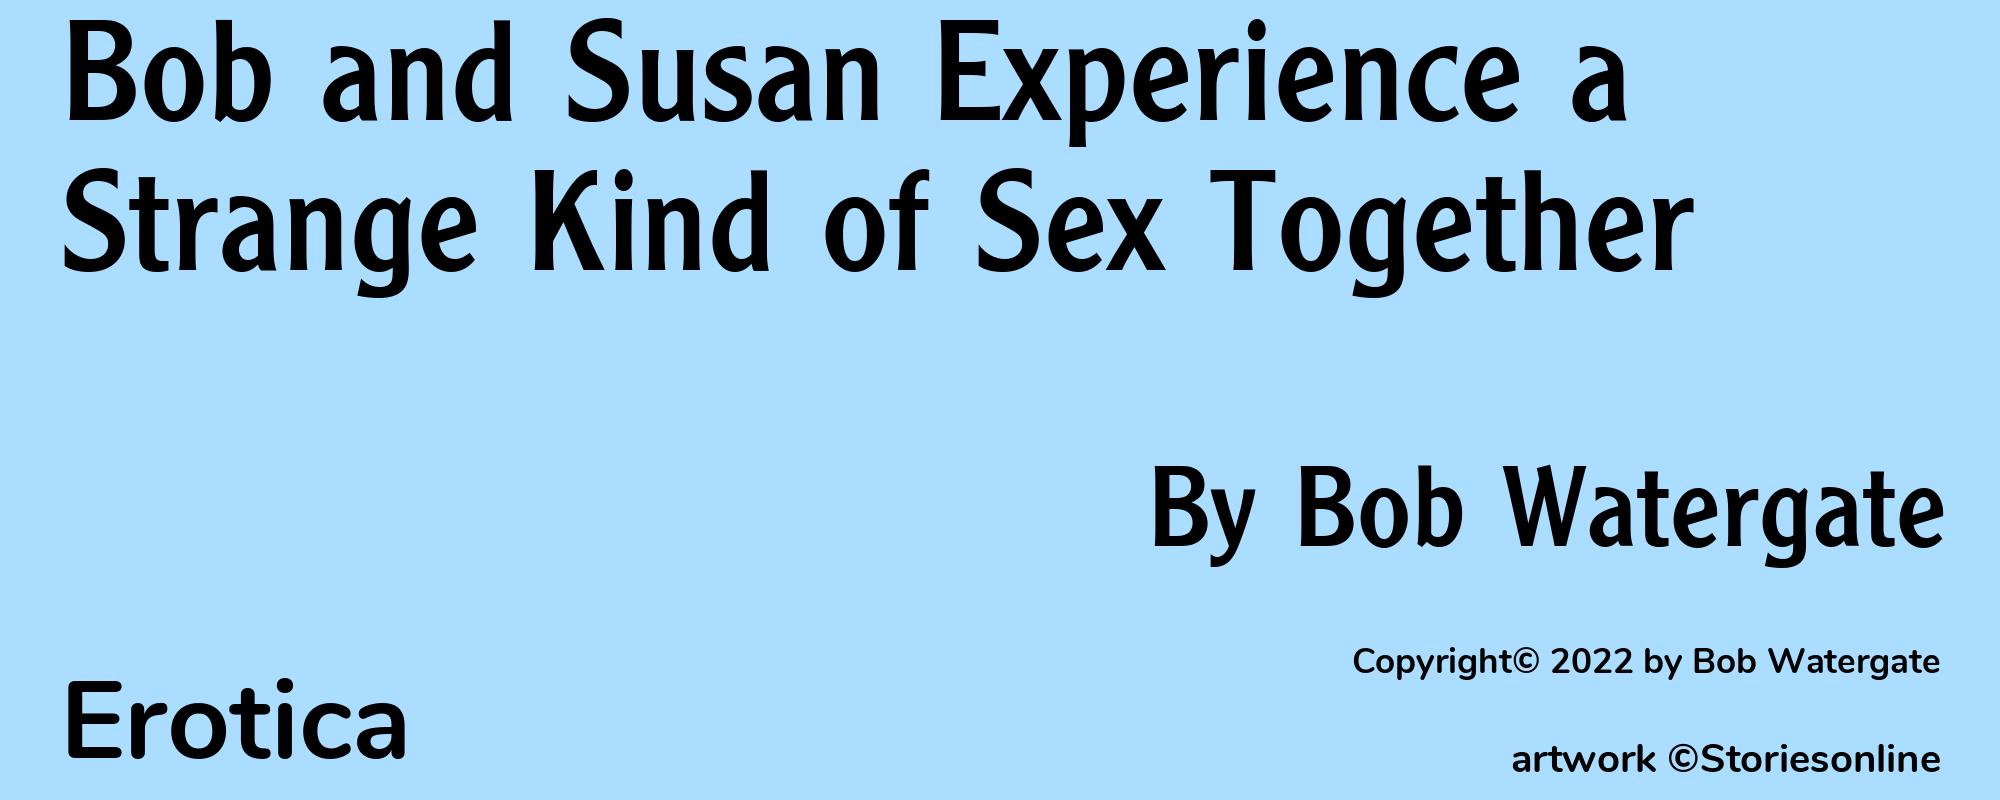 Bob and Susan Experience a Strange Kind of Sex Together - Cover